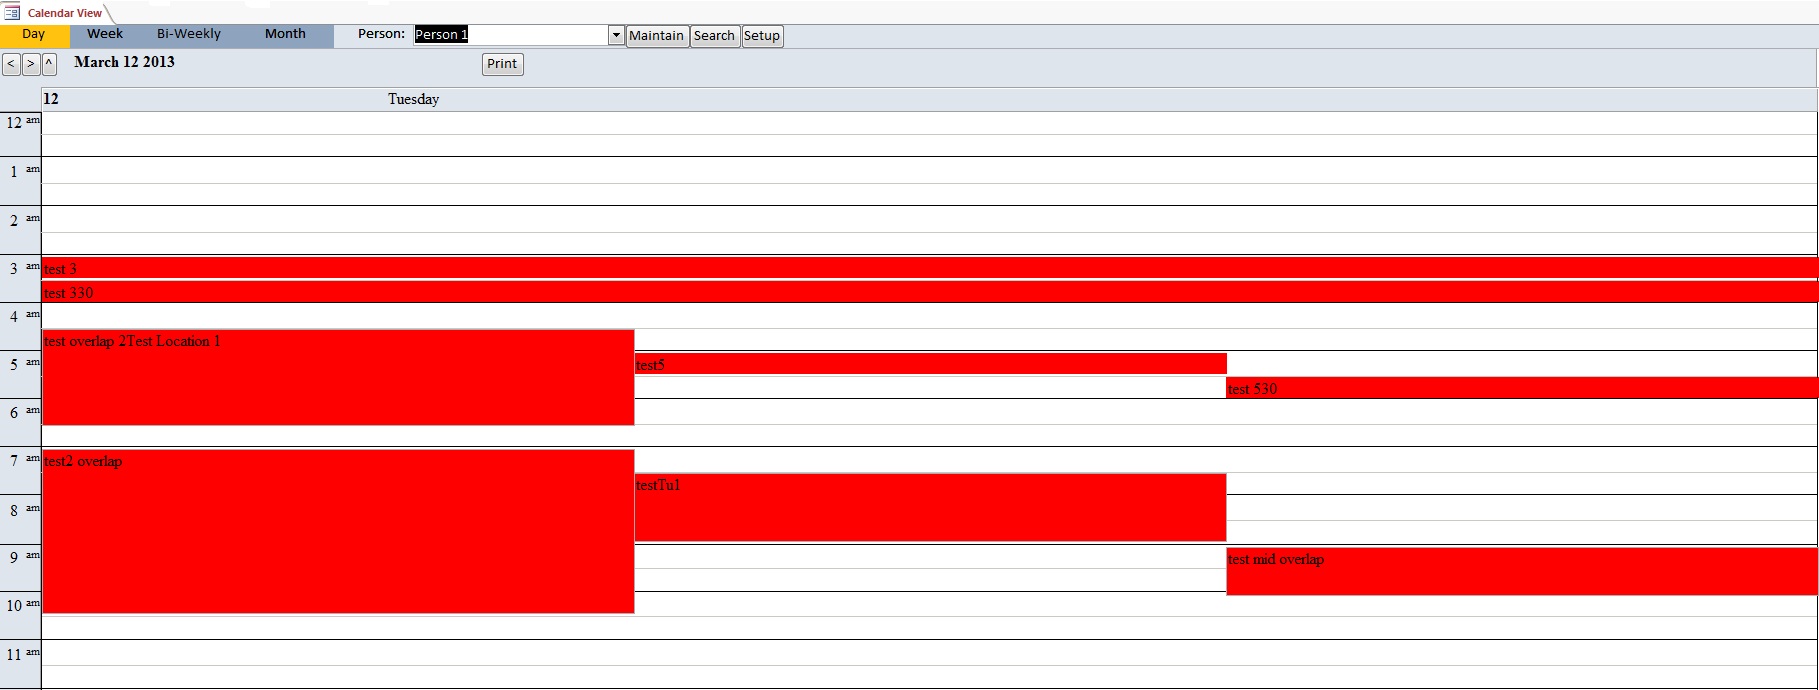 Human Resources Consultant Appointment Tracking Template Outlook Style | Appointment Database